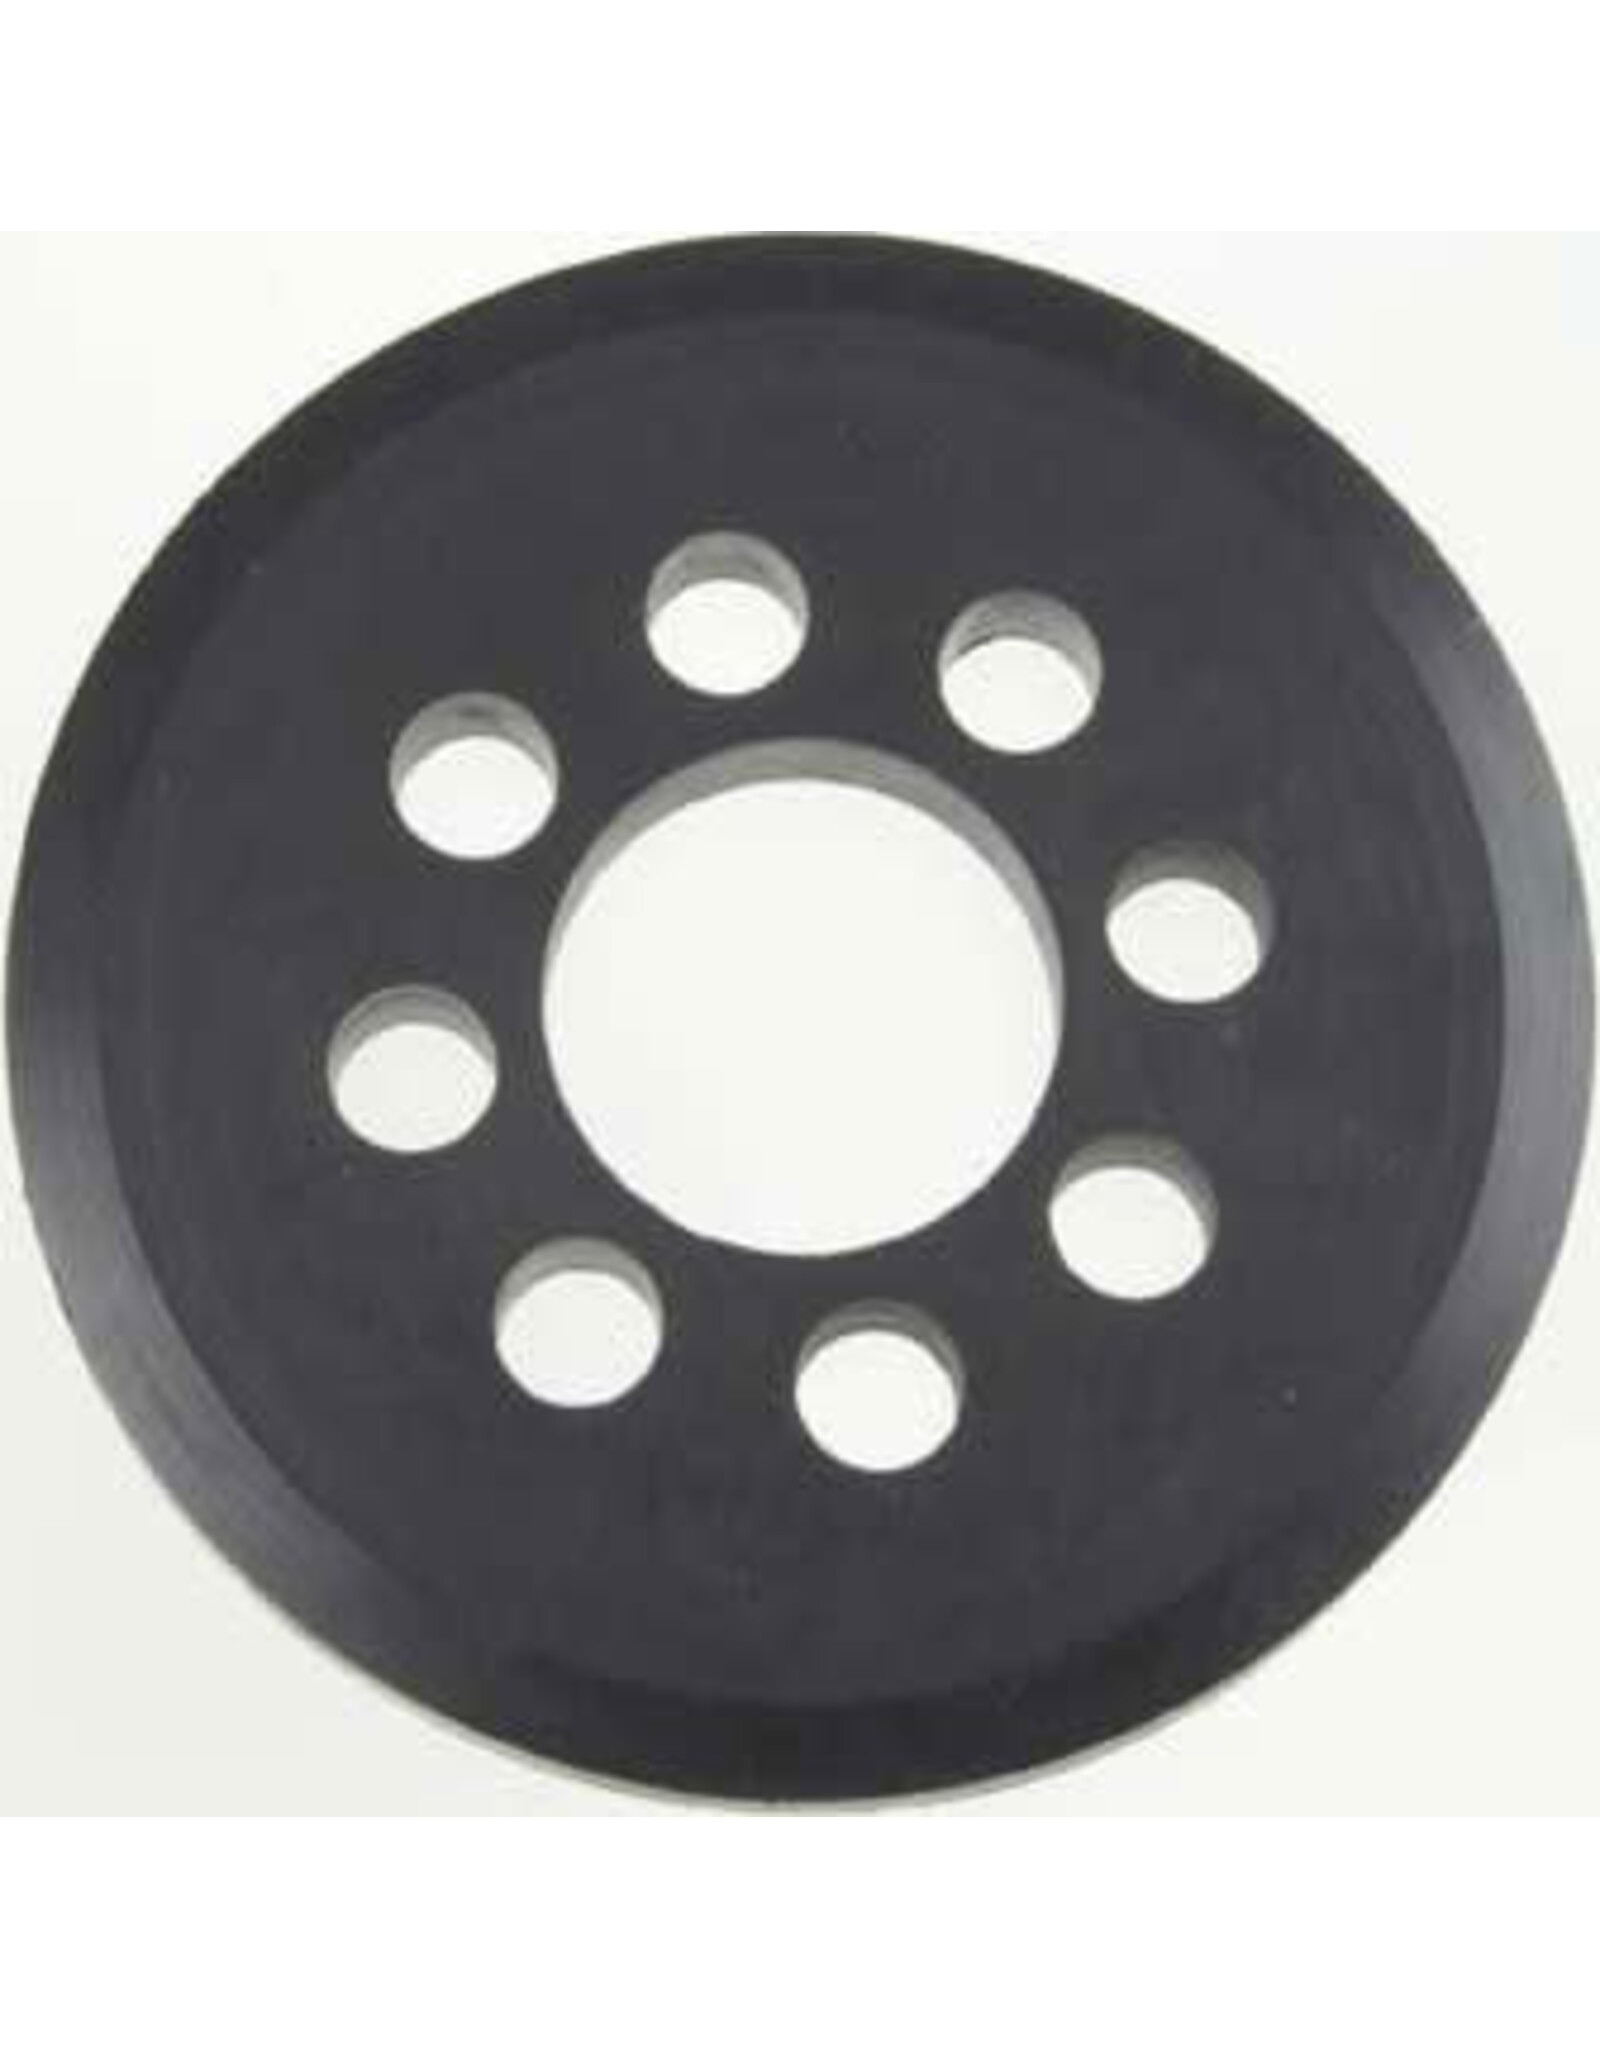 Ofna Rubber Wheel, Replacement